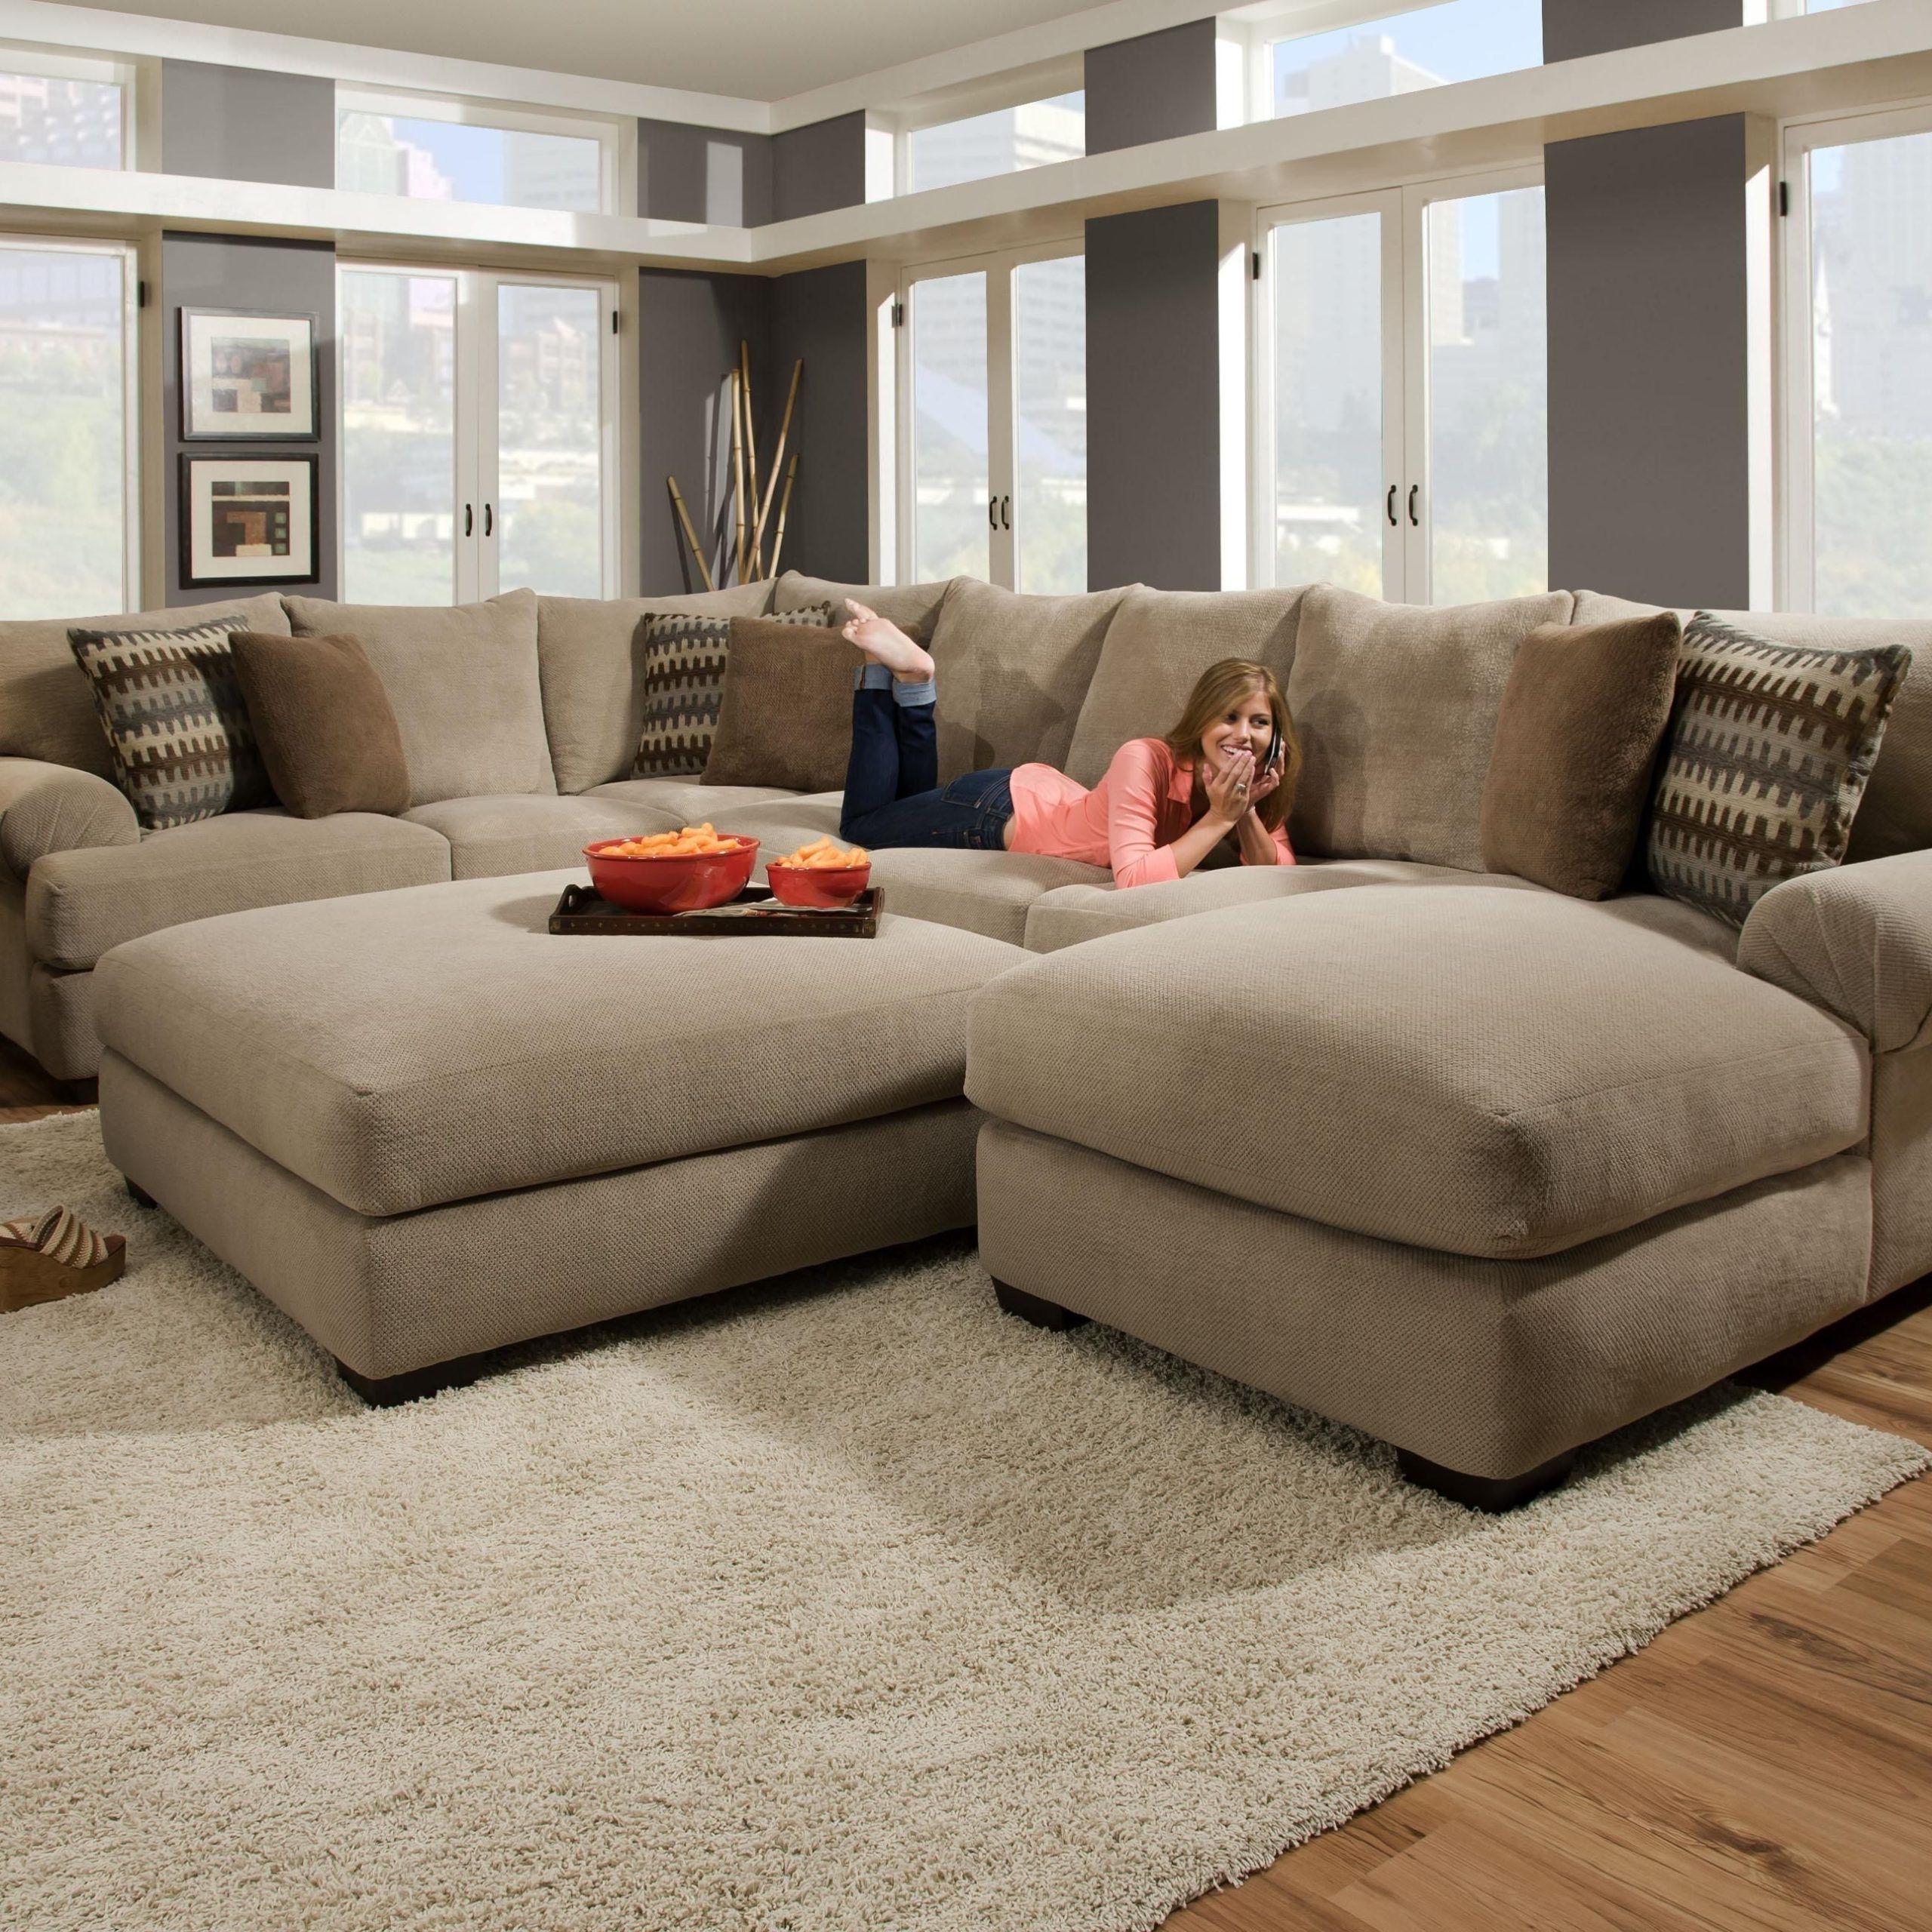 Best 10+ Of Deep U Shaped Sectionals | Comfortable Sectional Sofa Inside Modern U Shaped Sectional Couch Sets (View 16 of 20)